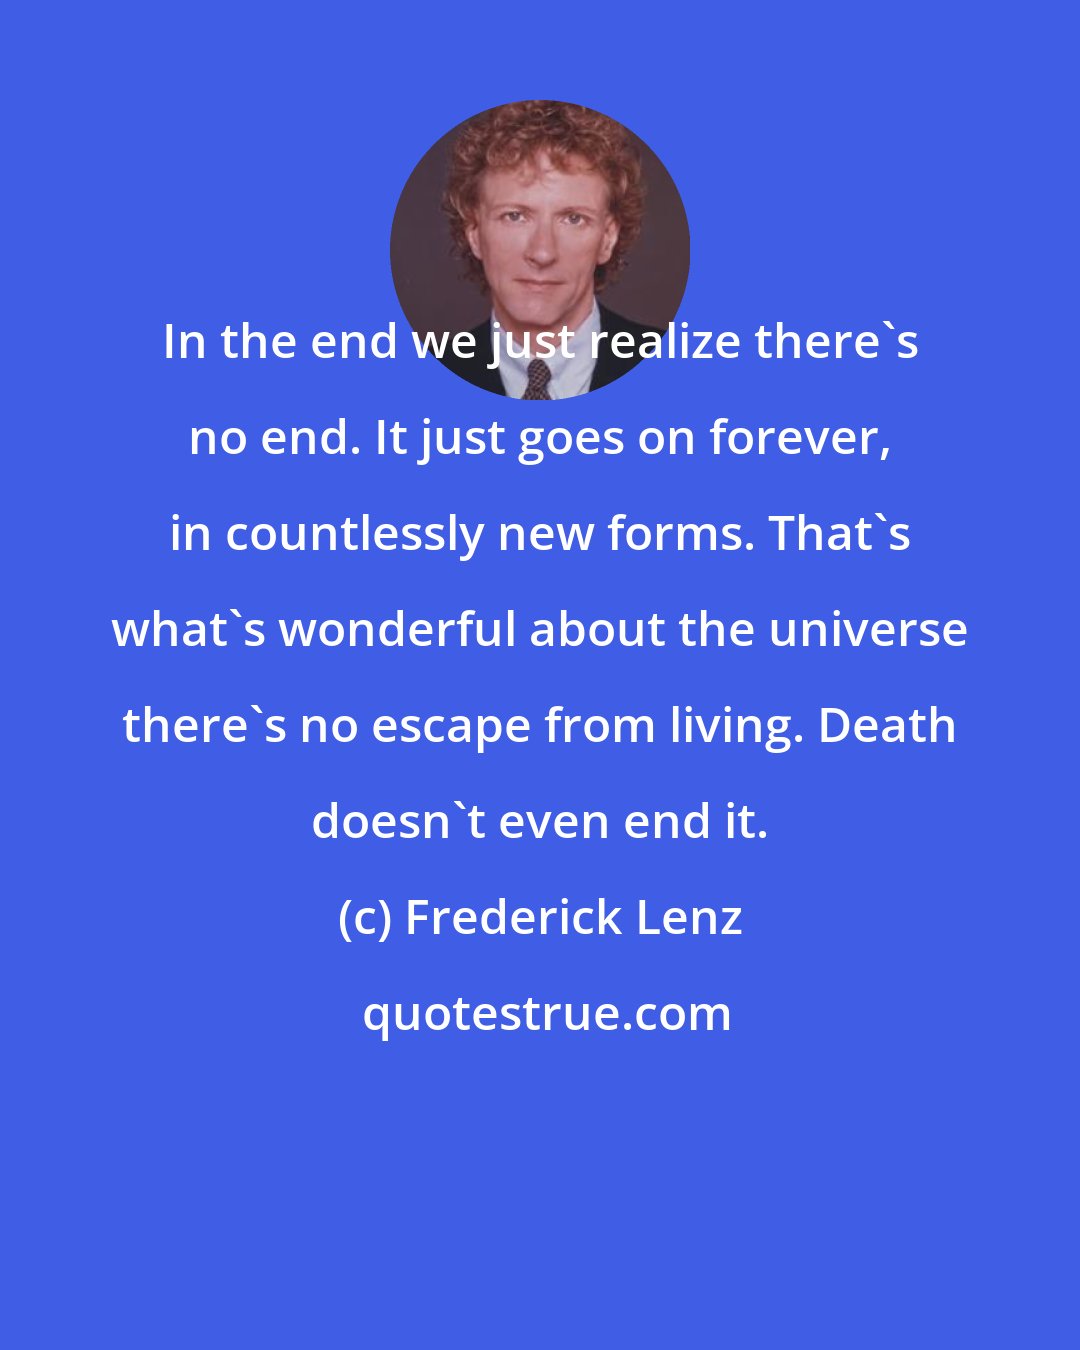 Frederick Lenz: In the end we just realize there's no end. It just goes on forever, in countlessly new forms. That's what's wonderful about the universe there's no escape from living. Death doesn't even end it.